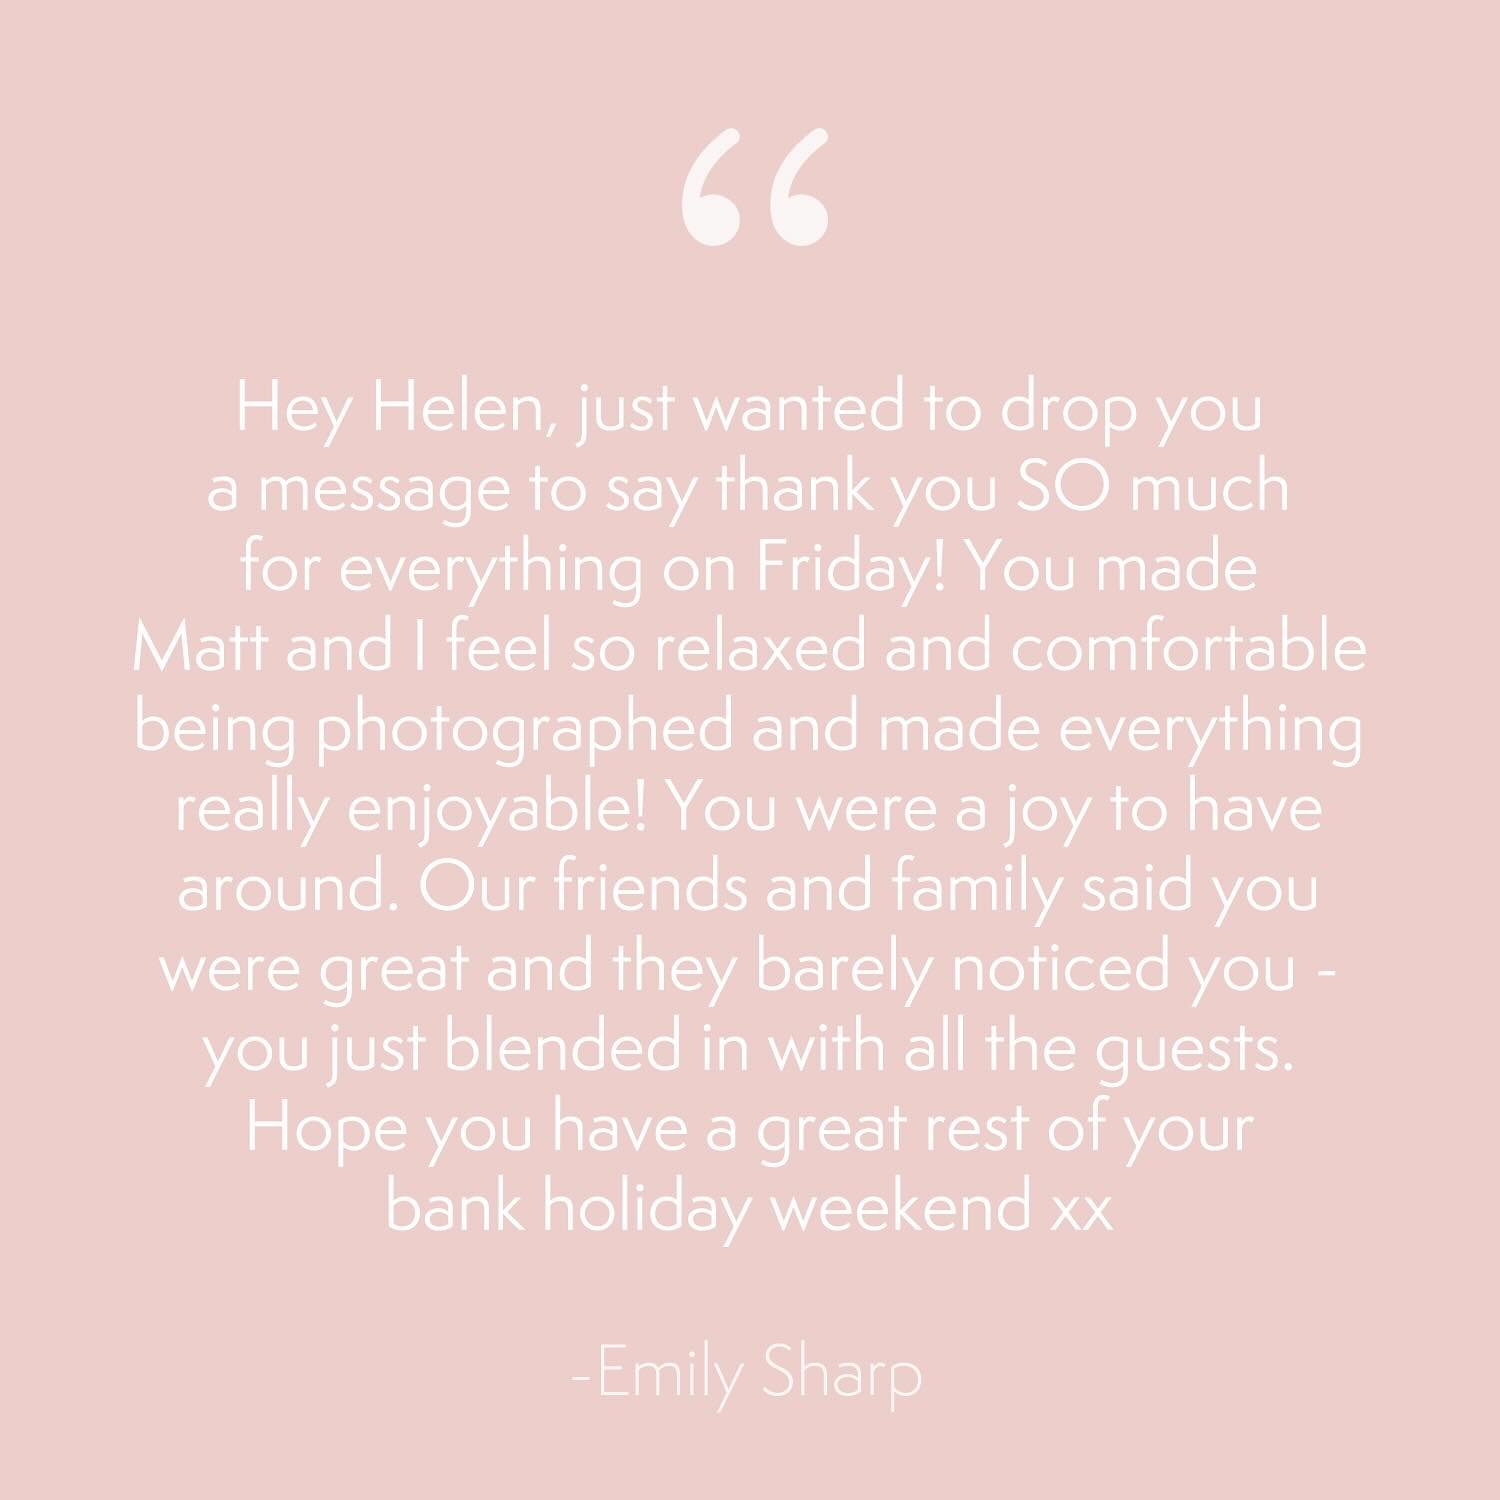 How lovely to receive such kind words after a busy weekend of gorgeous weddings! ☺️ I absolutely loved capturing Emily &amp; Matt&rsquo;s special day, sneak peek coming soon! 😍🤩😍

#weddingtestimonial #weddingreview #kindwords #weddingphotography #